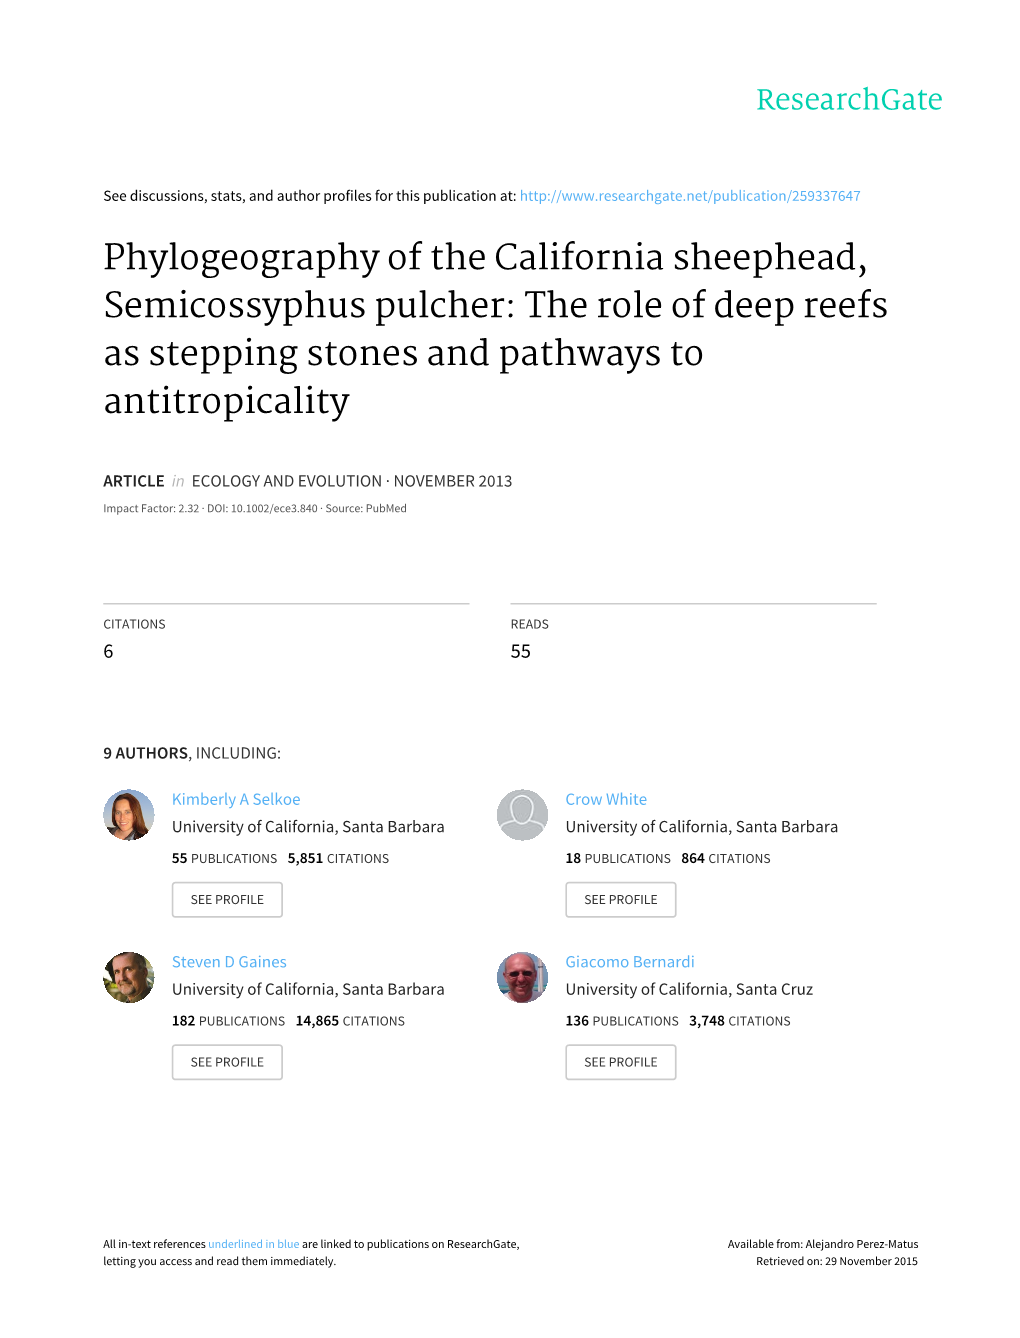 Phylogeography of the California Sheephead, Semicossyphus Pulcher: the Role of Deep Reefs As Stepping Stones and Pathways to Antitropicality